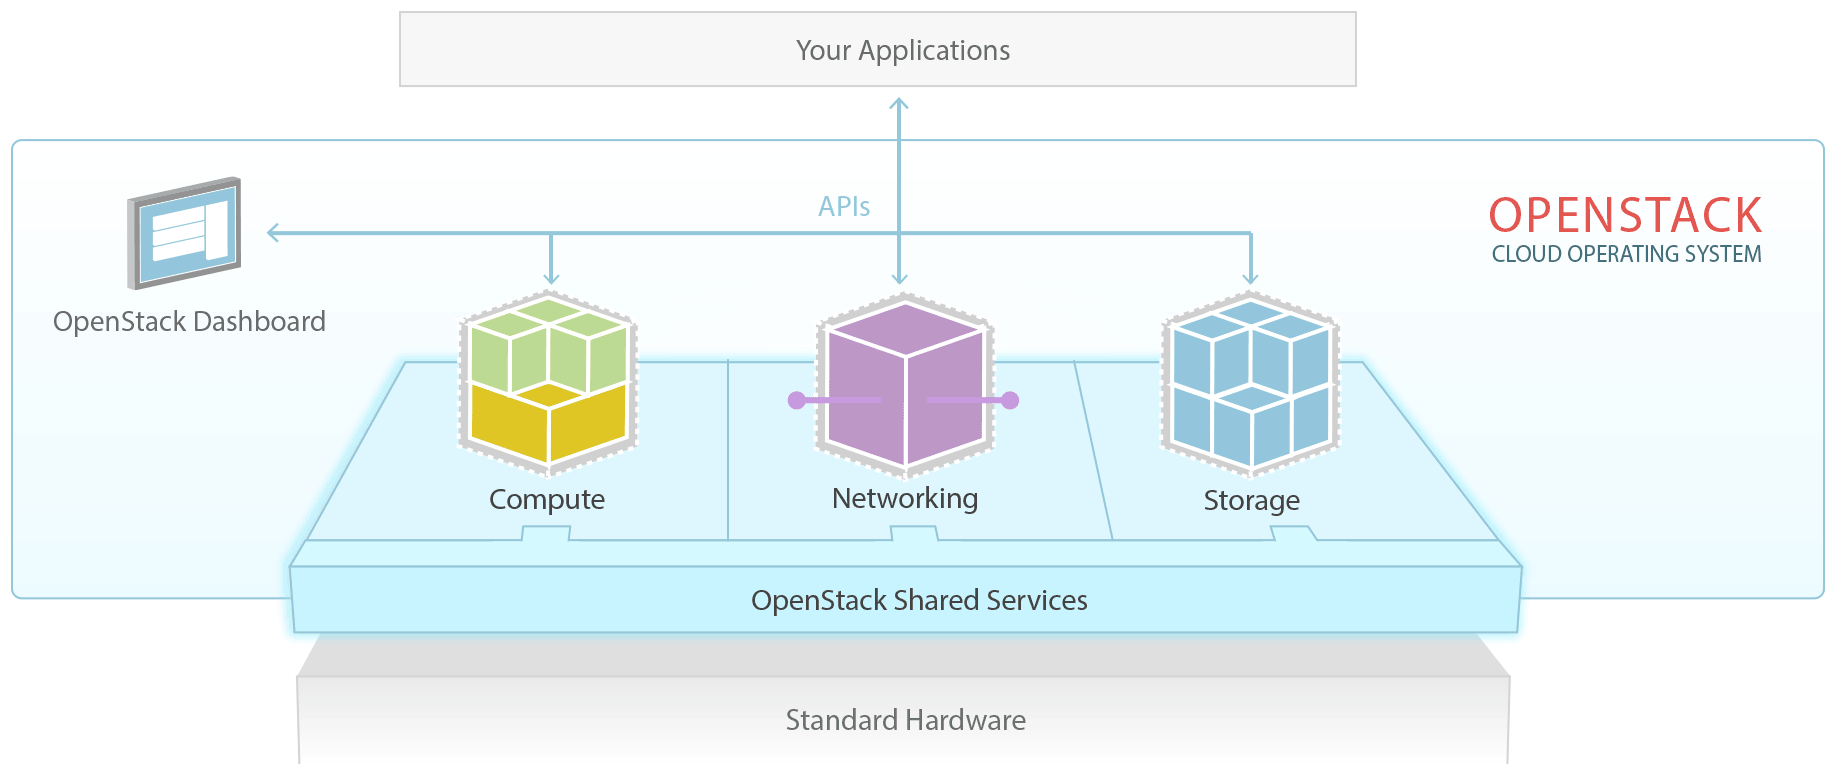 OpenStack Cloud Operating System